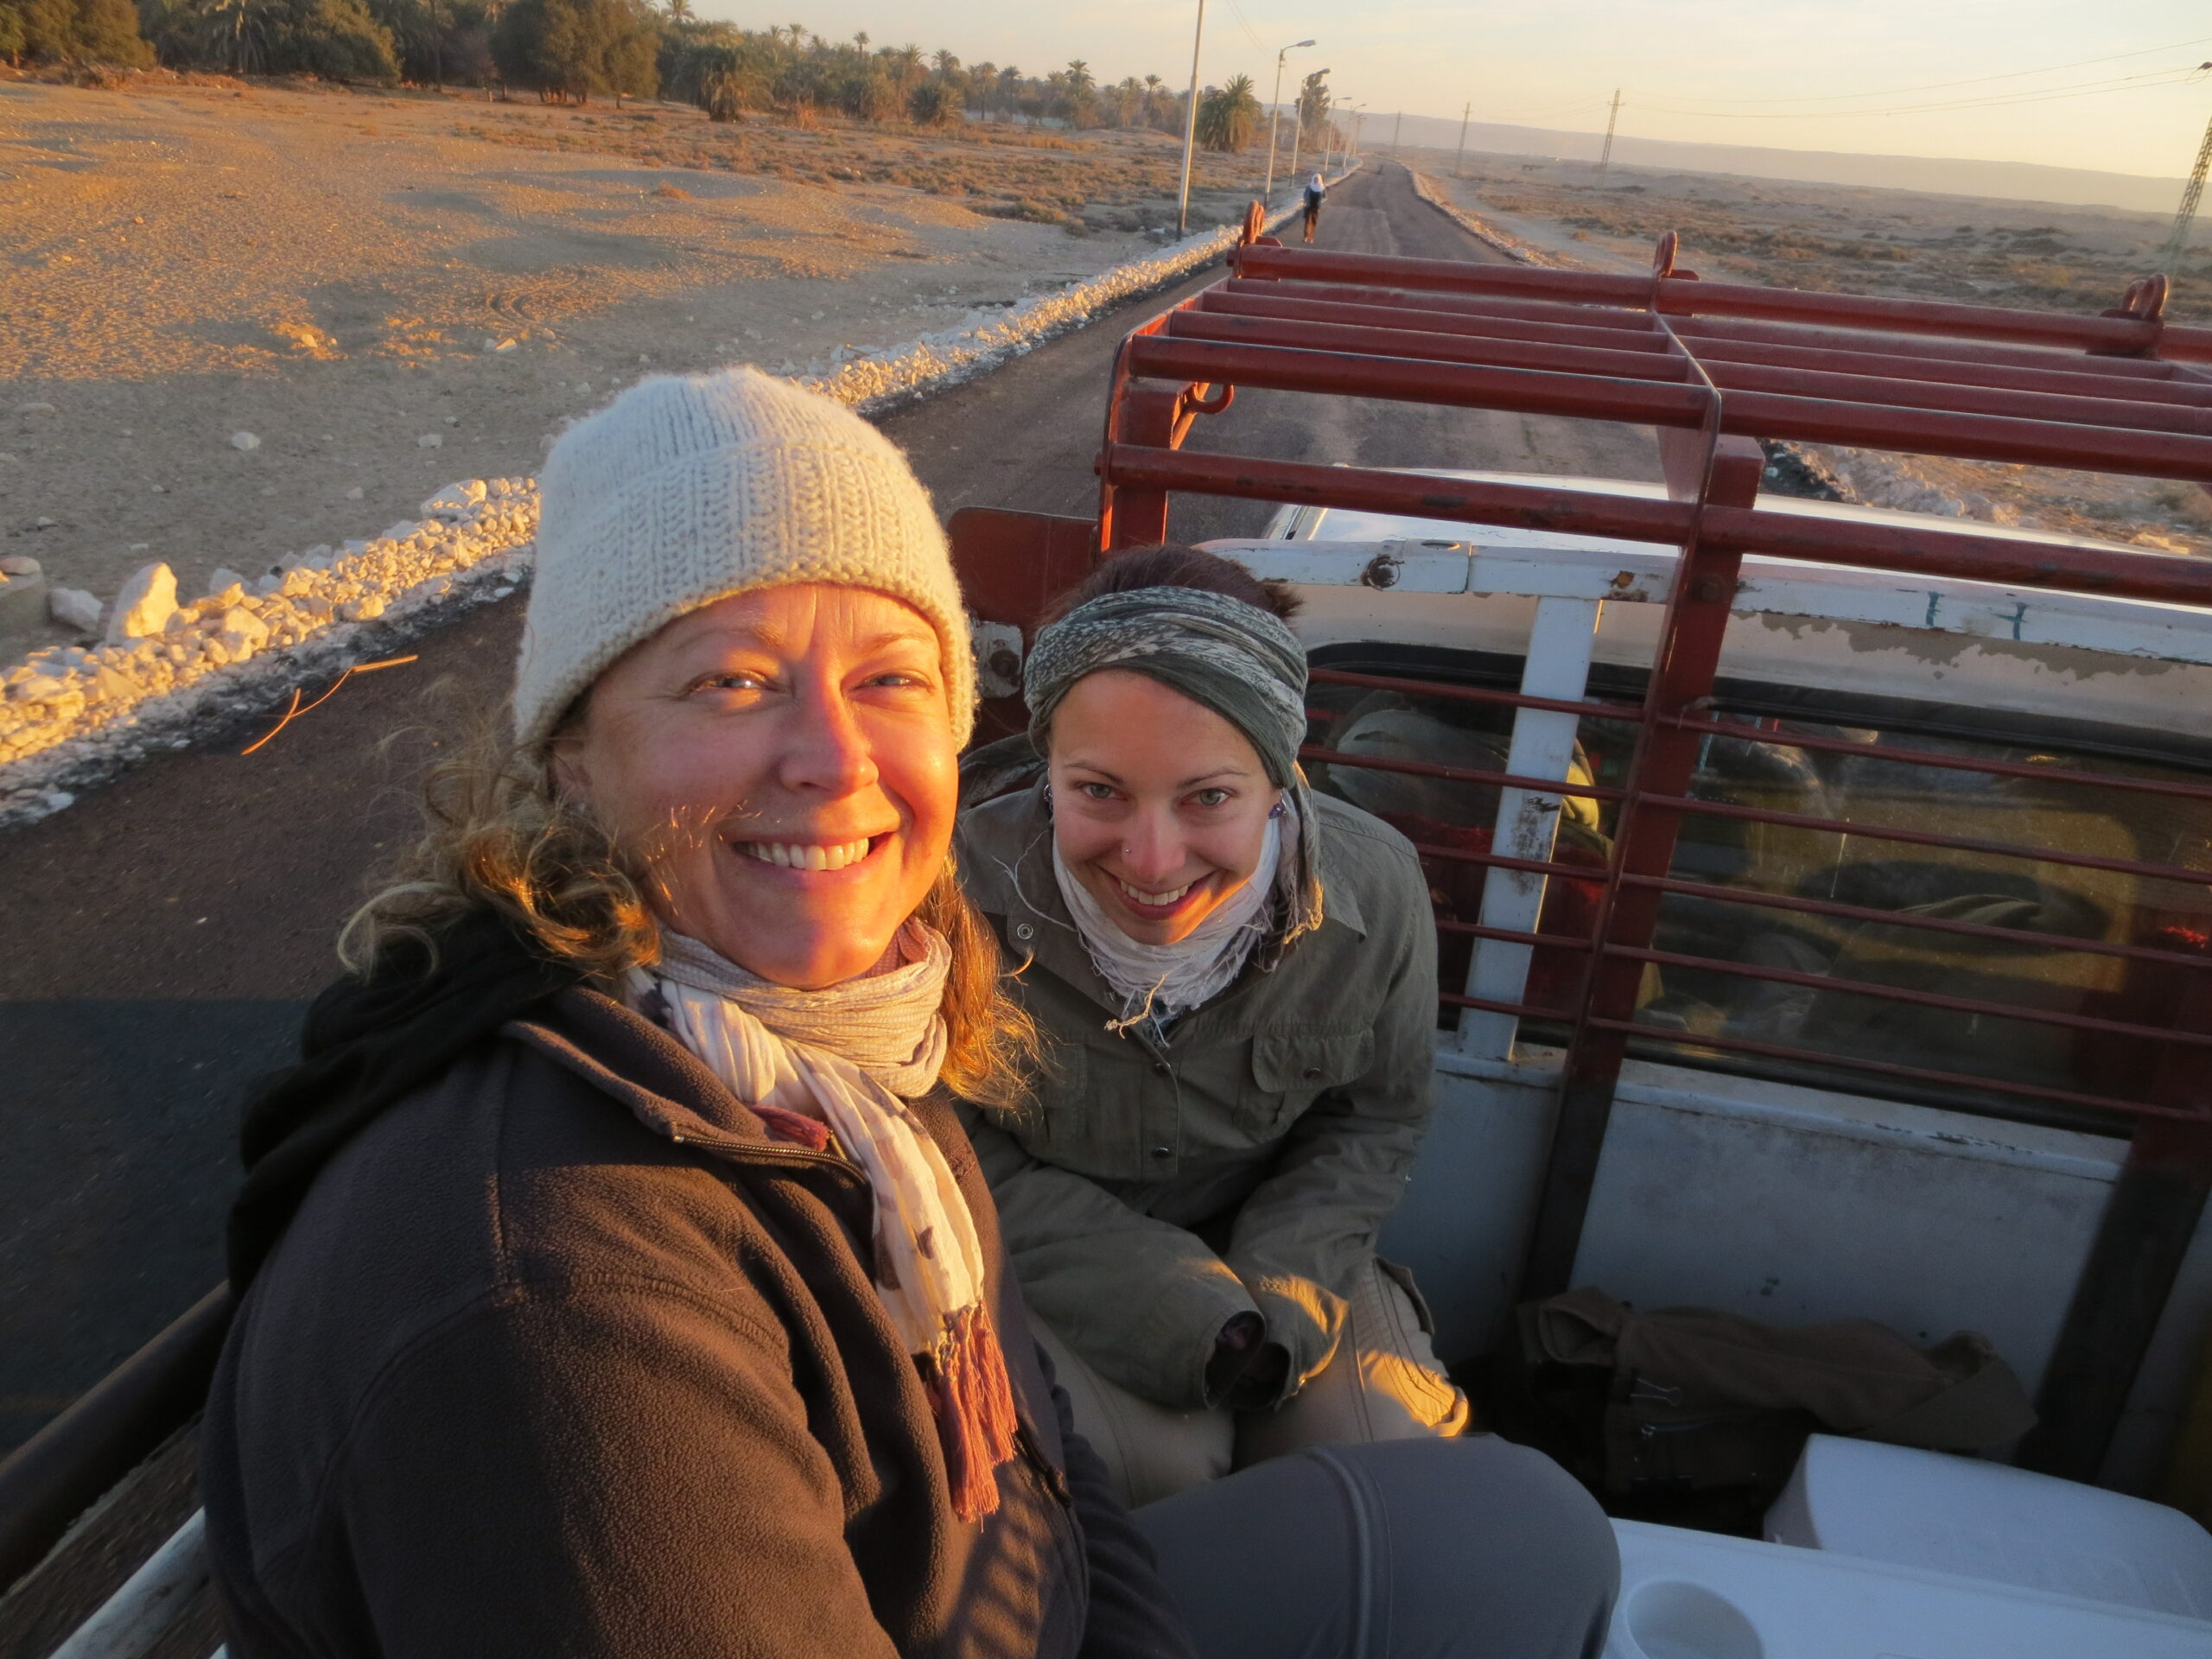 The windy early morning drive to the temple site - with Sue Kelly and Anna Hodgkinson